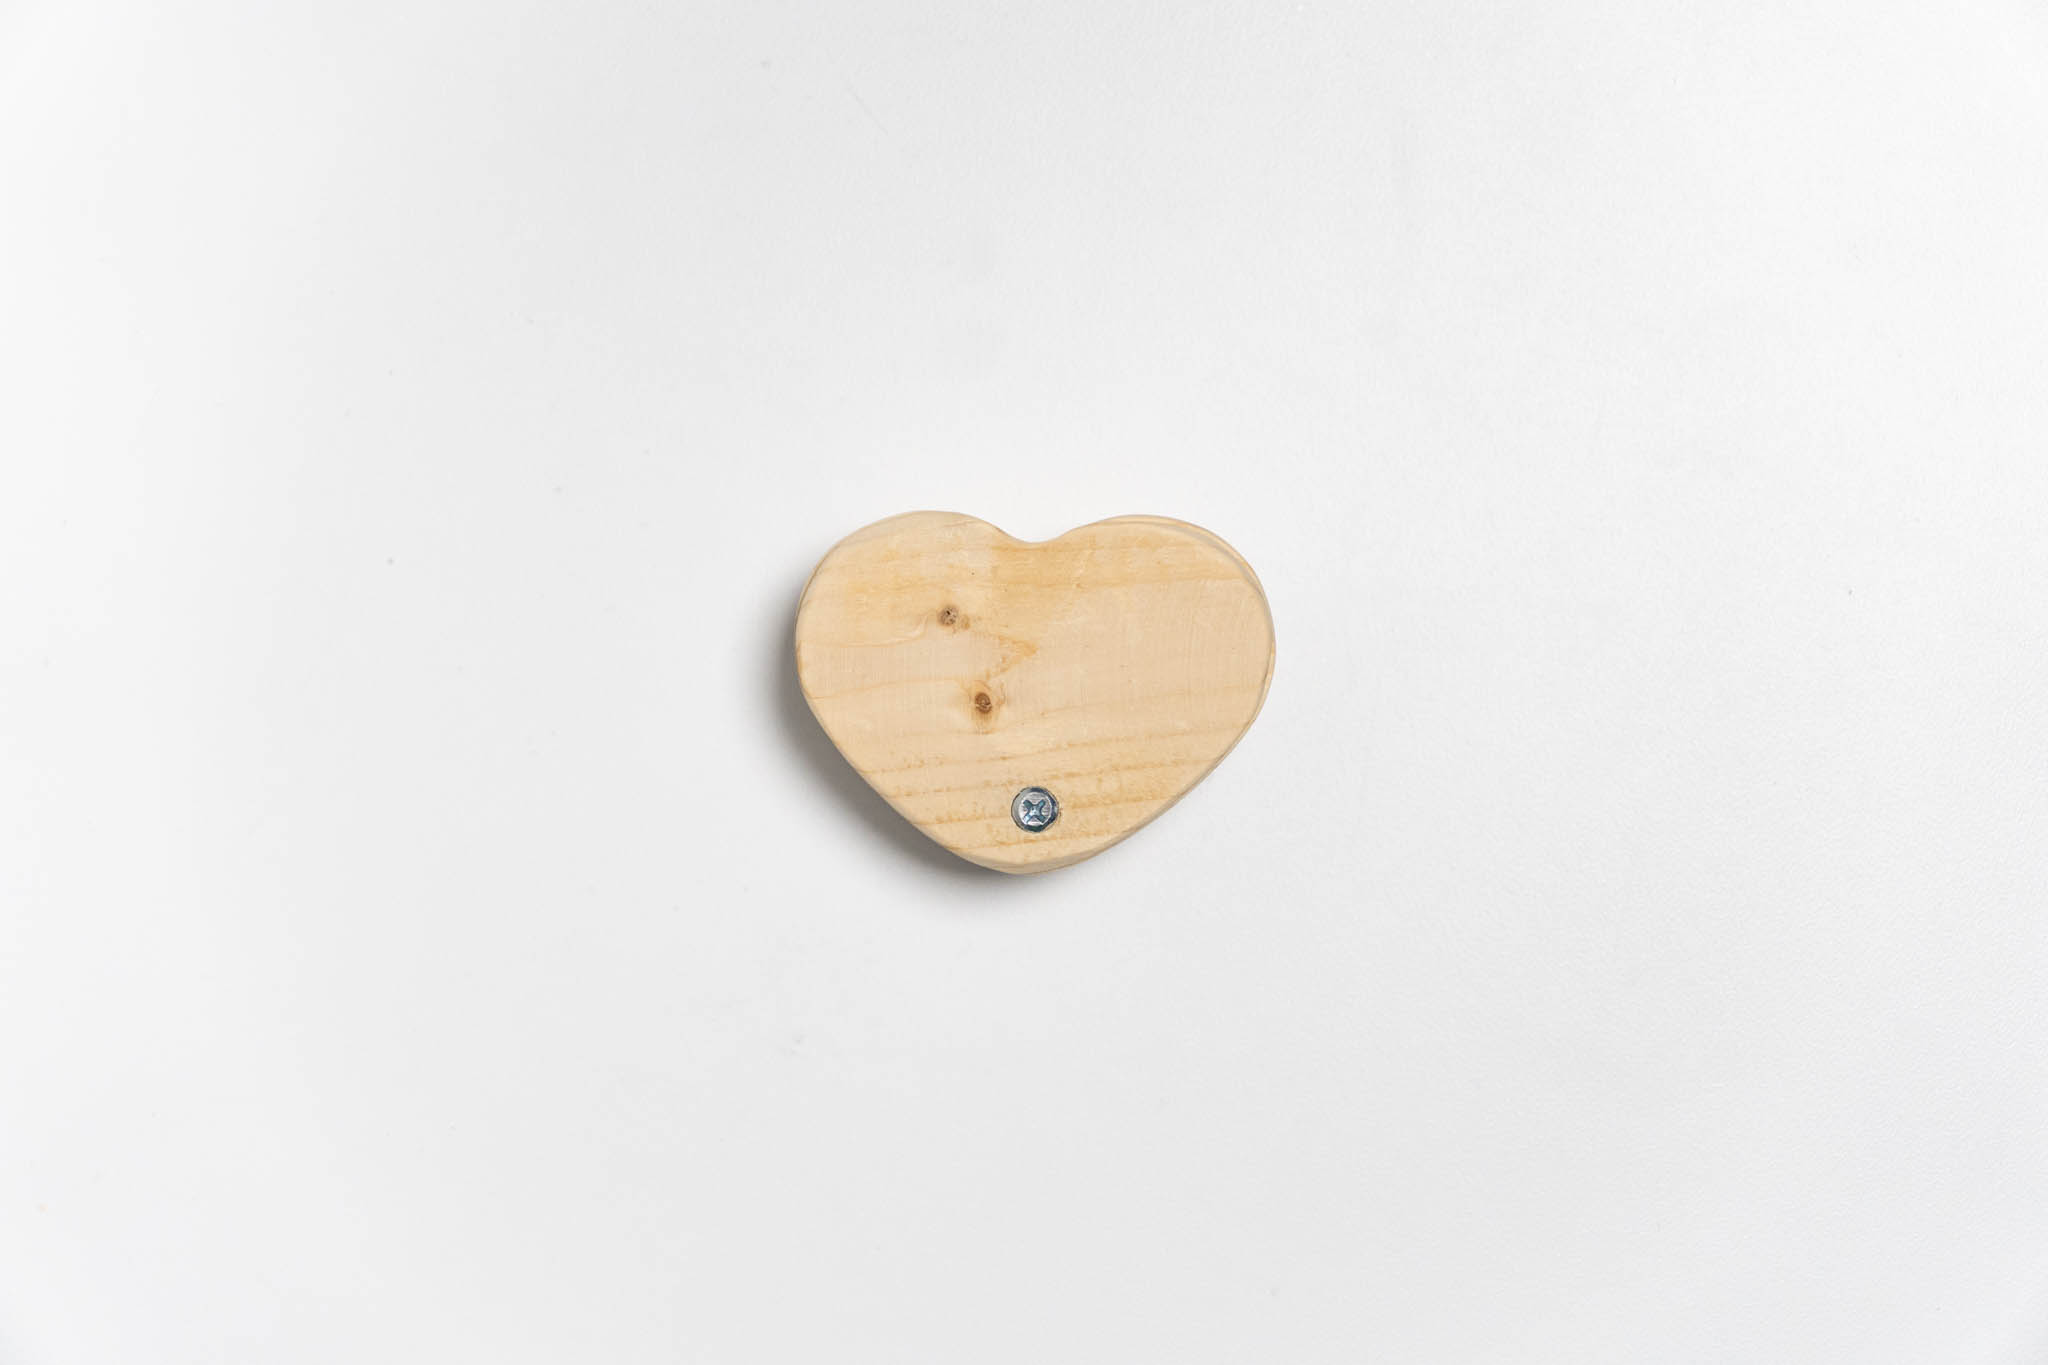 top view of a small heart-shaped wooden beige box with its lid ancored around the tip, closed